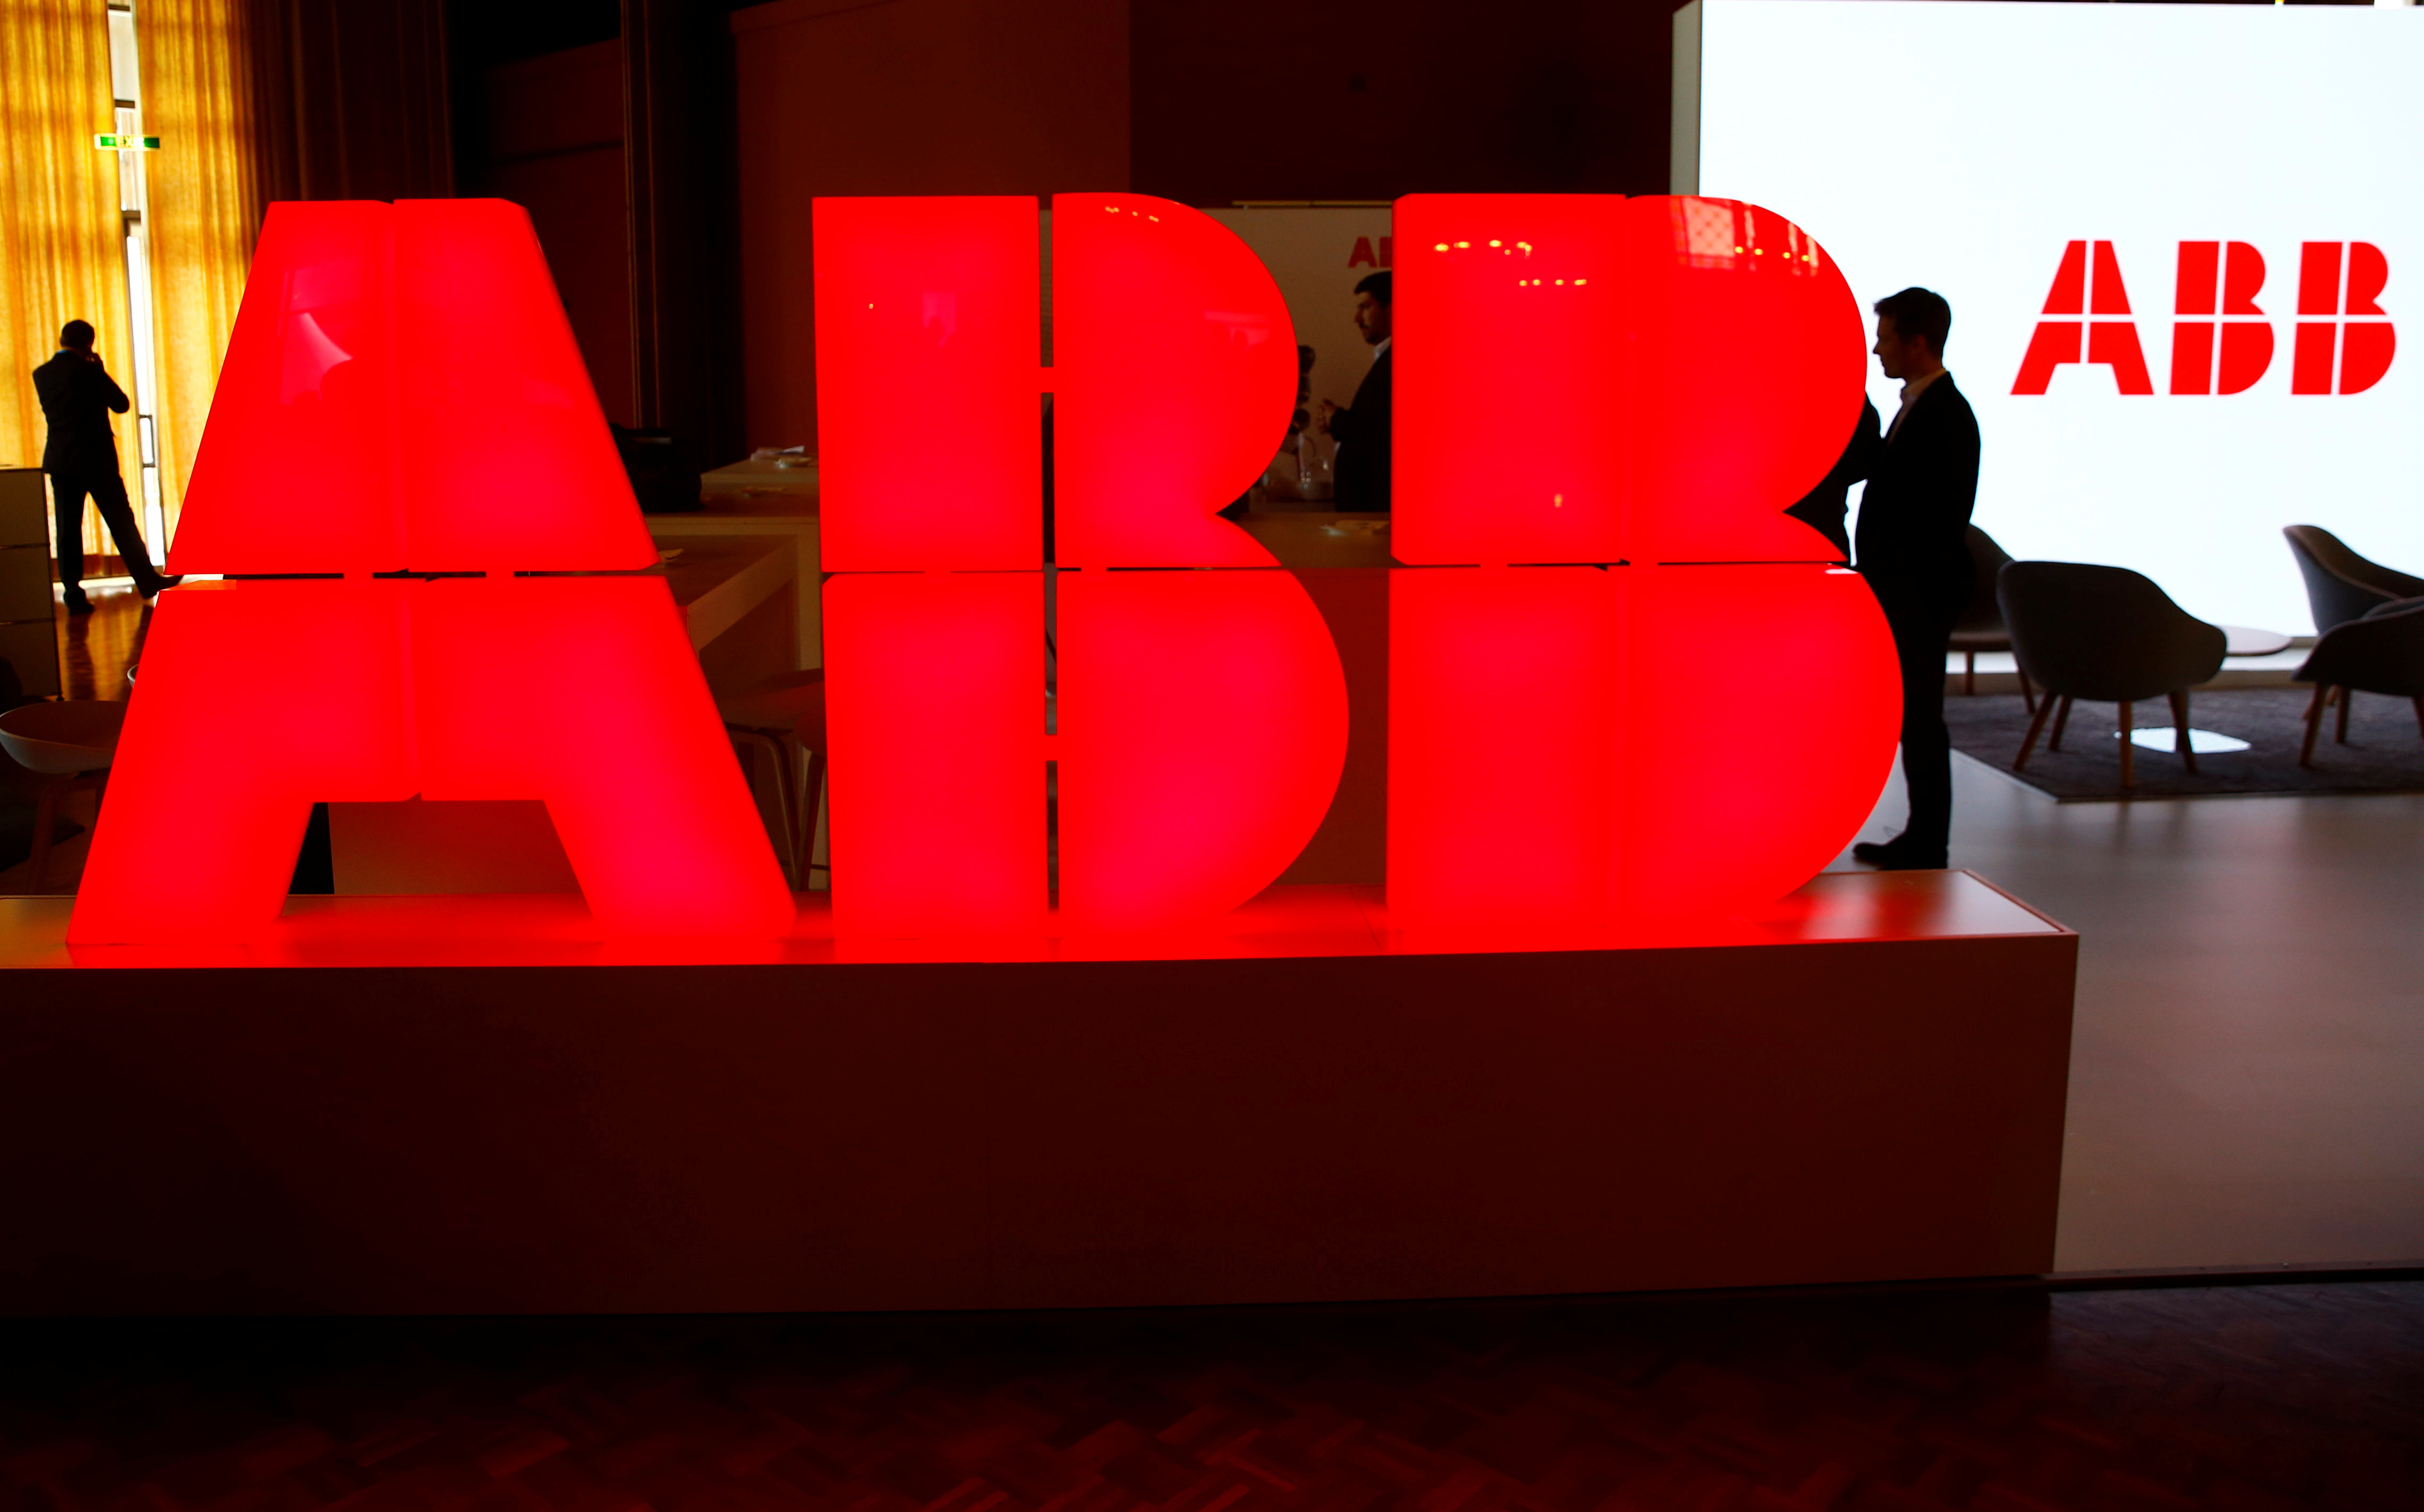 Logo of Swiss power technology and automation group ABB is seen at the Swiss Economic Forum conference in Interlaken